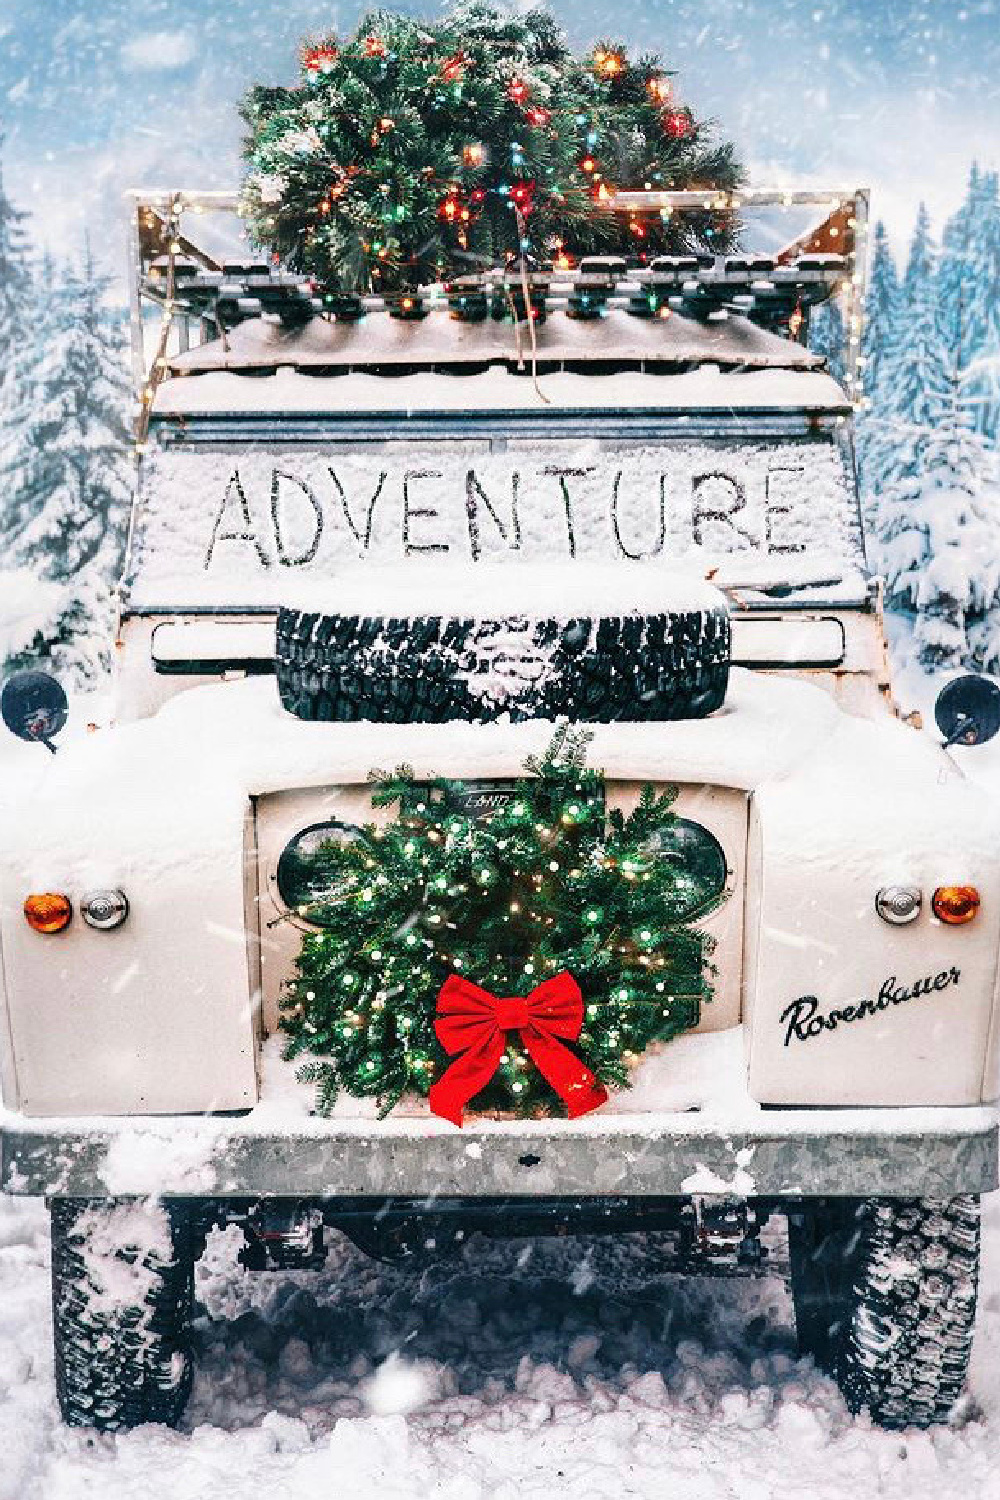 Charming SUV decorated for Christmas with wreath in snowy woods - @tildeathdousart. #christmascozy #christmascar #christmasroadtrip